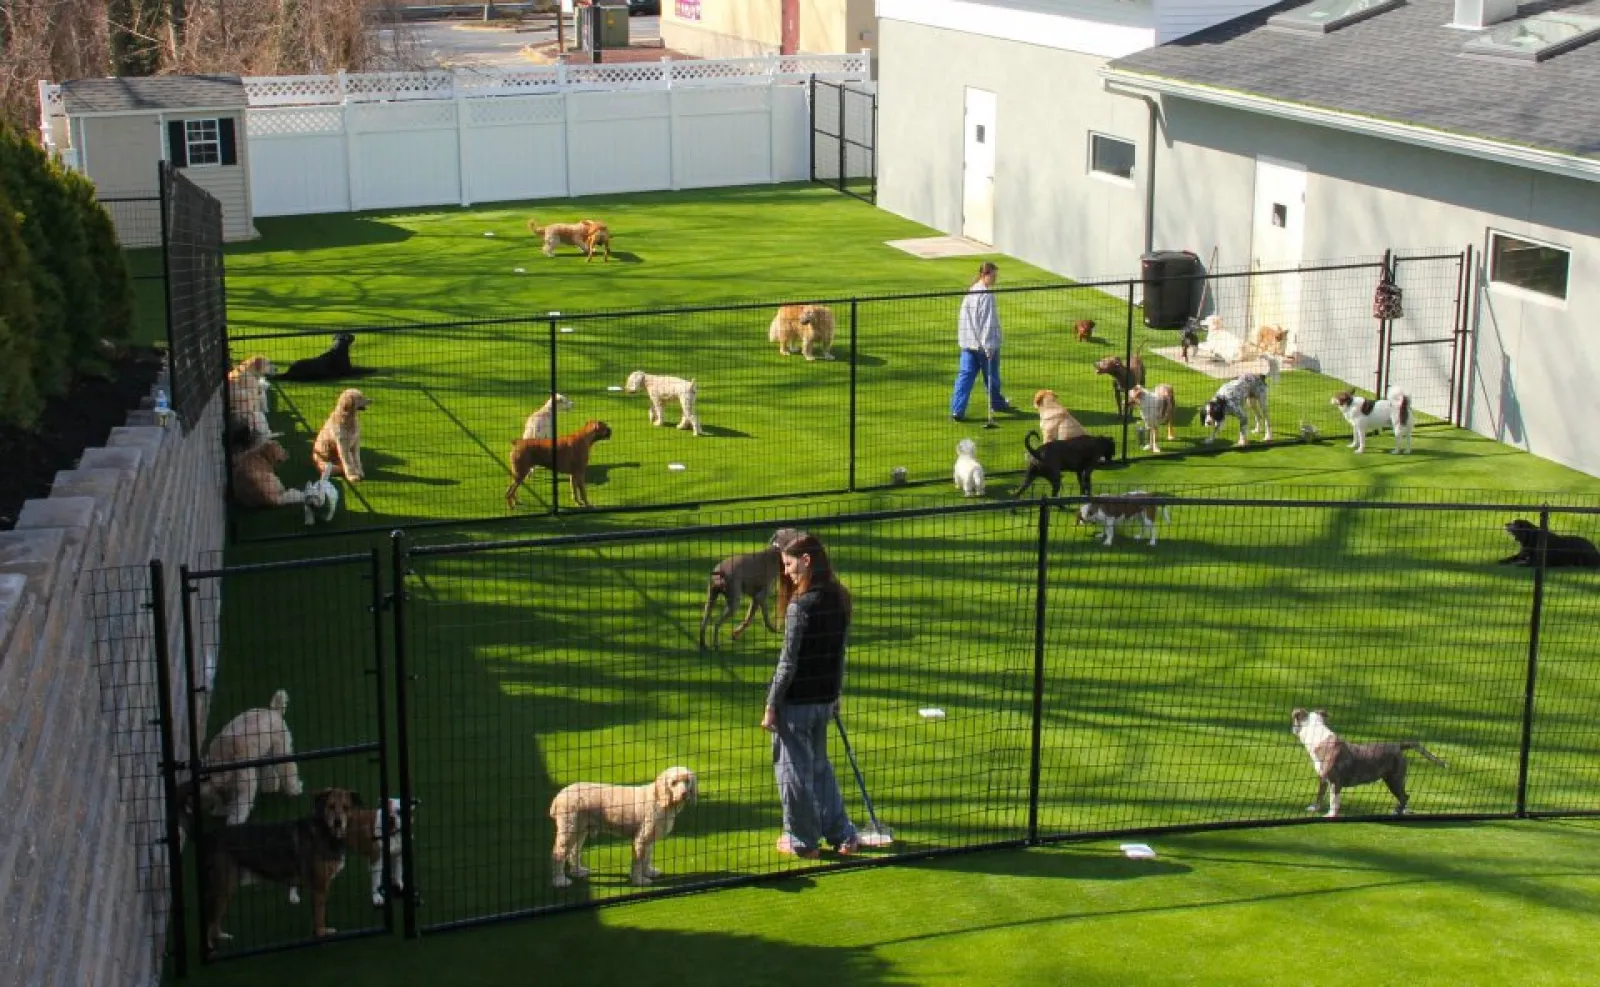 a group of people in a fenced in area with animals